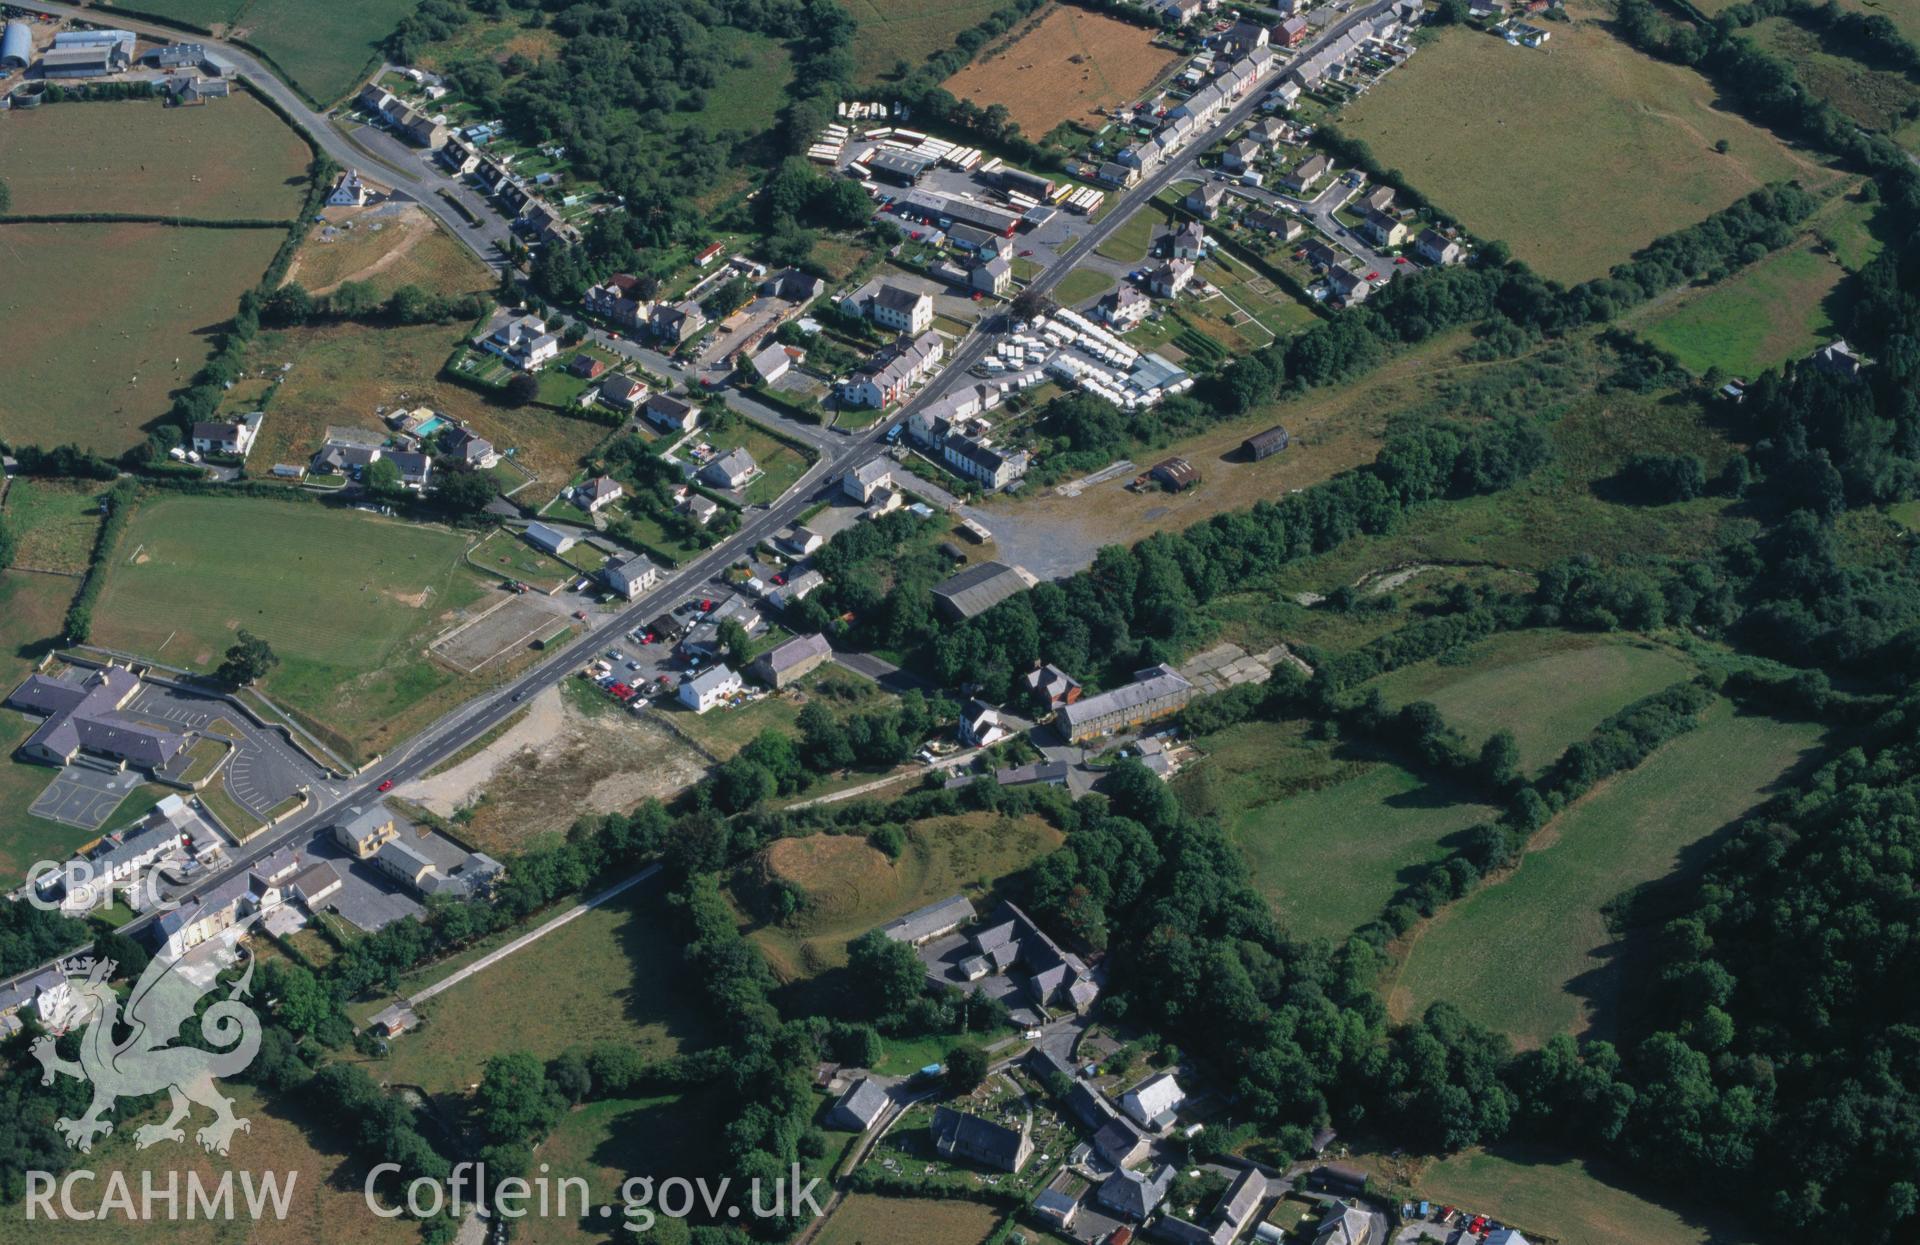 Slide of RCAHMW colour oblique aerial photograph of Pencader, taken by C.R. Musson, 23/8/1995.